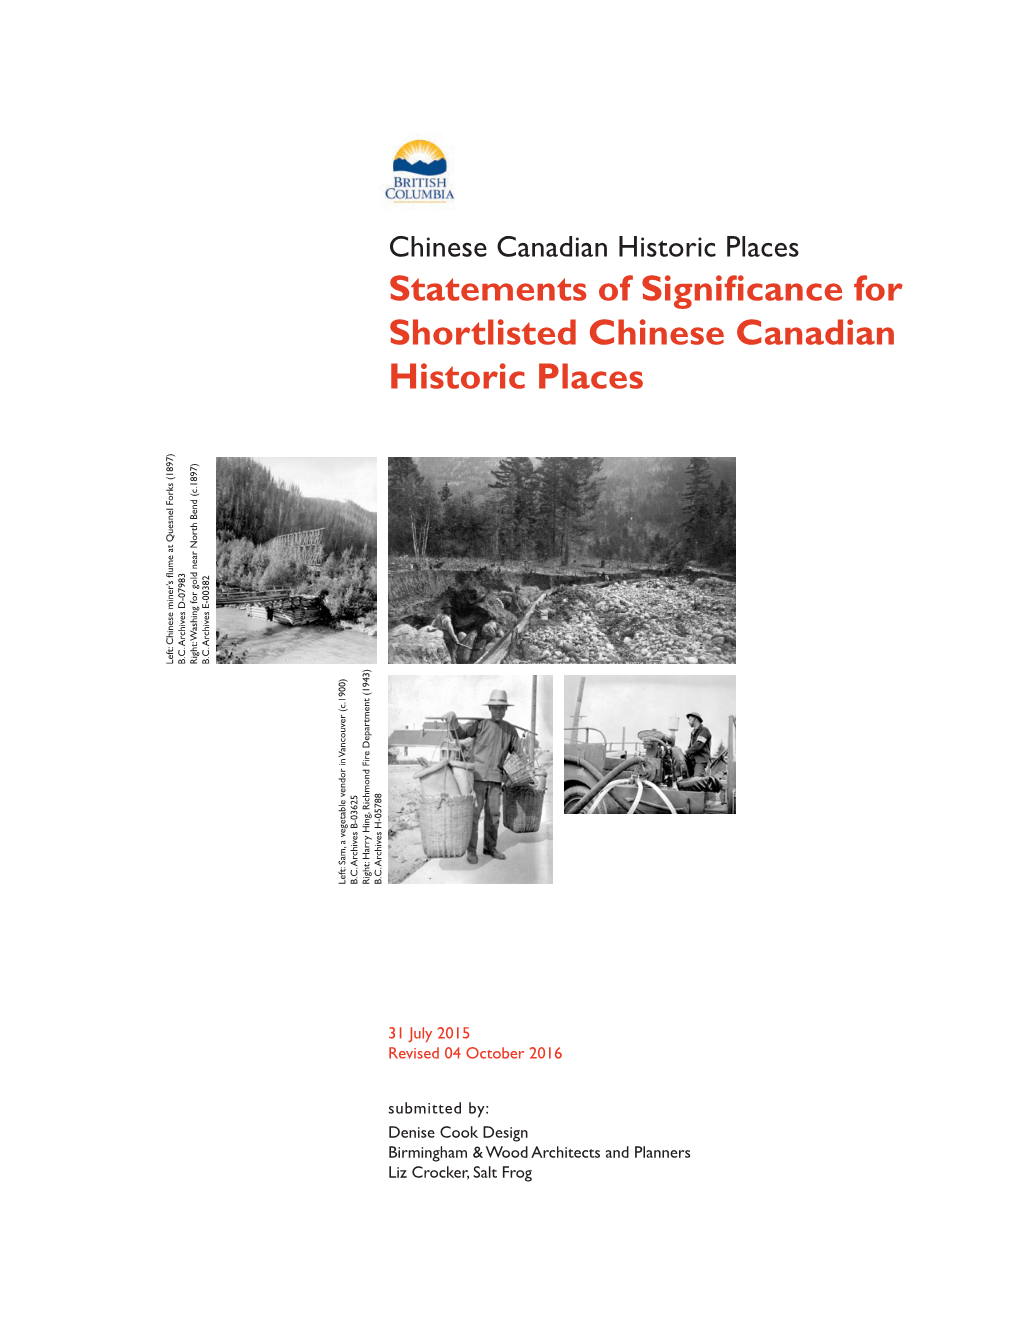 Statements of Significance for Shortlisted Chinese Canadian Historic Places